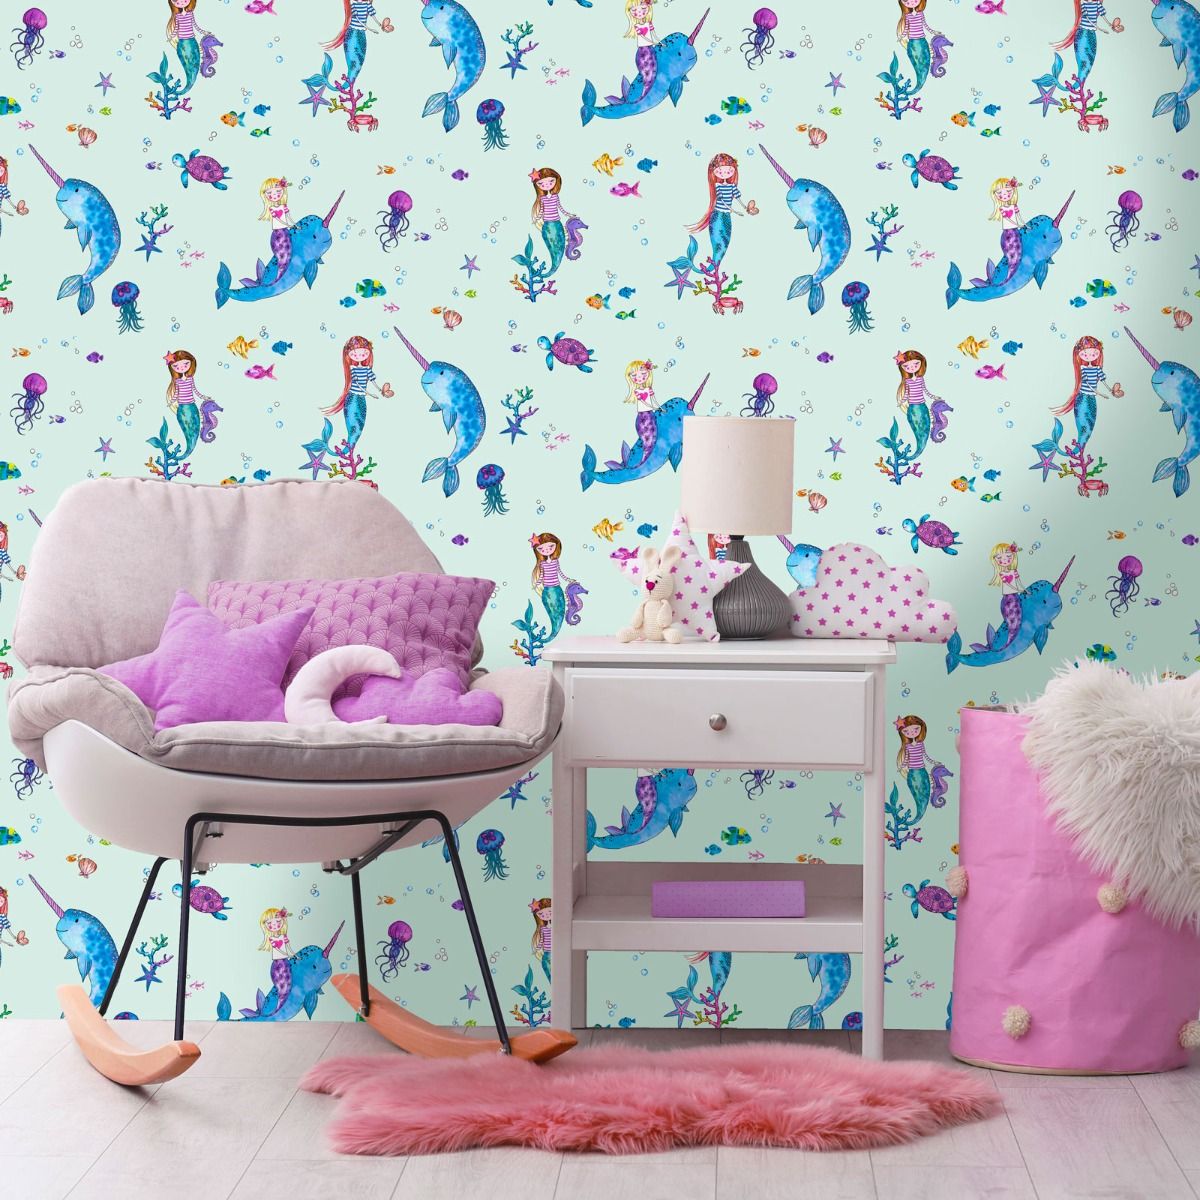 holden wallpaper competition two hundred pounds prize